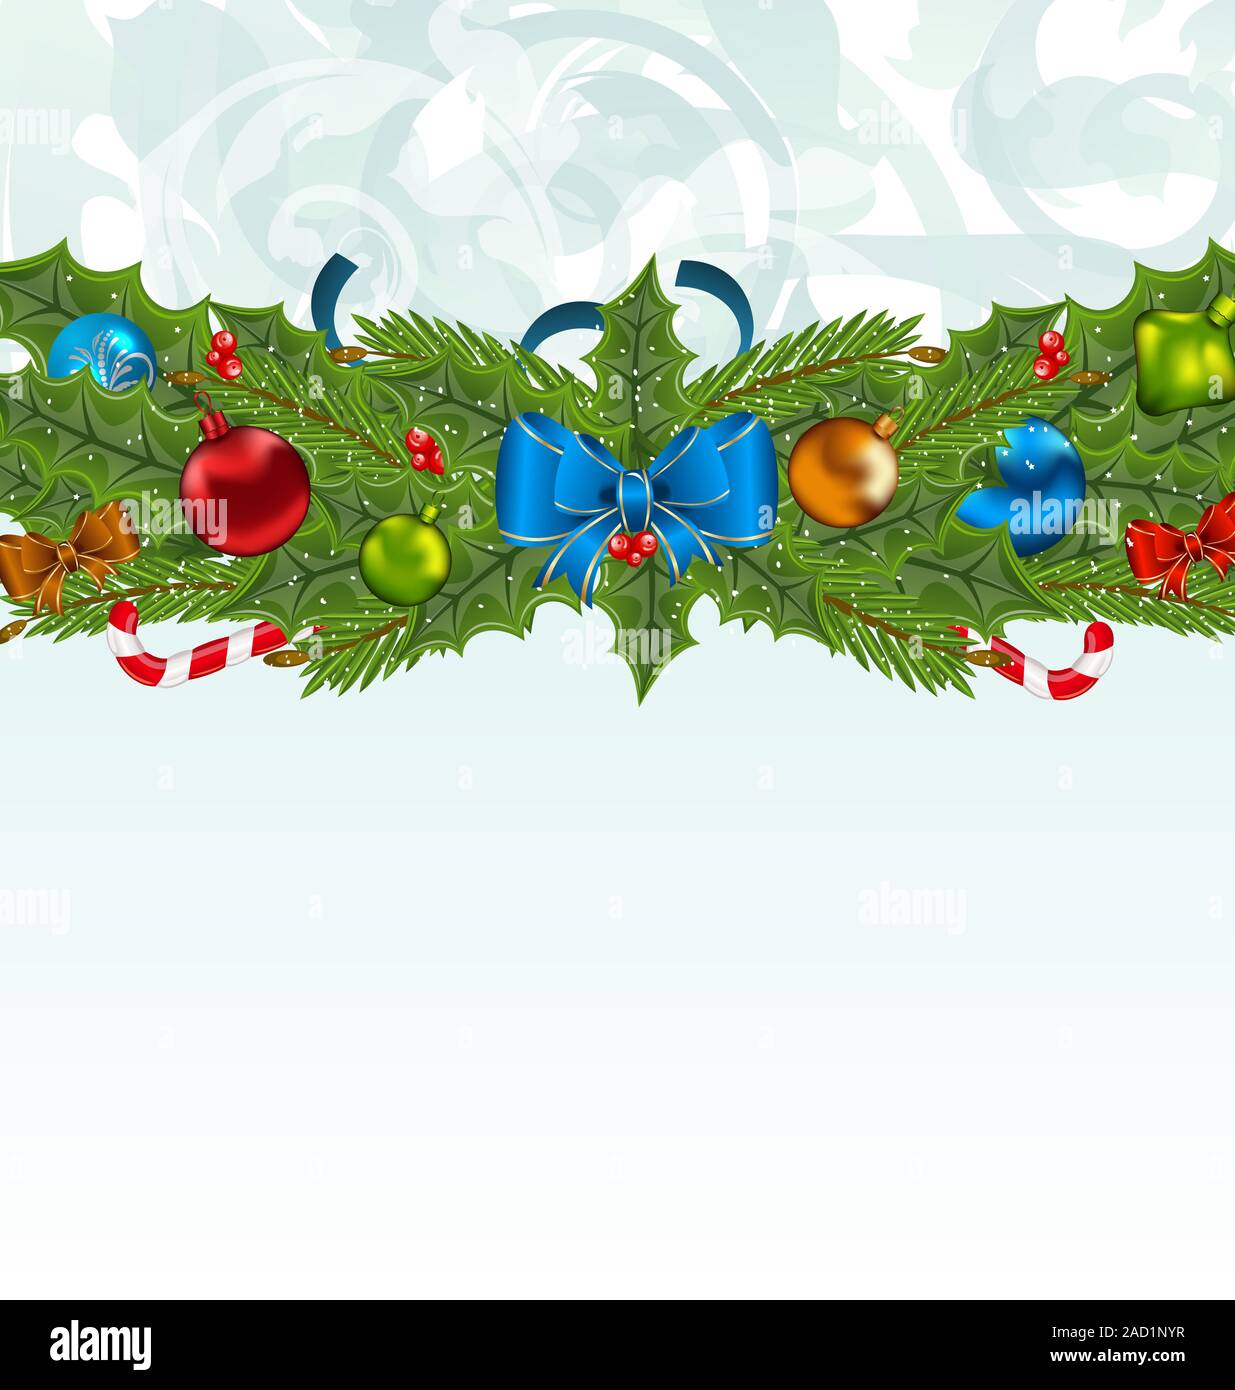 Christmas background with holiday decoration Stock Photo